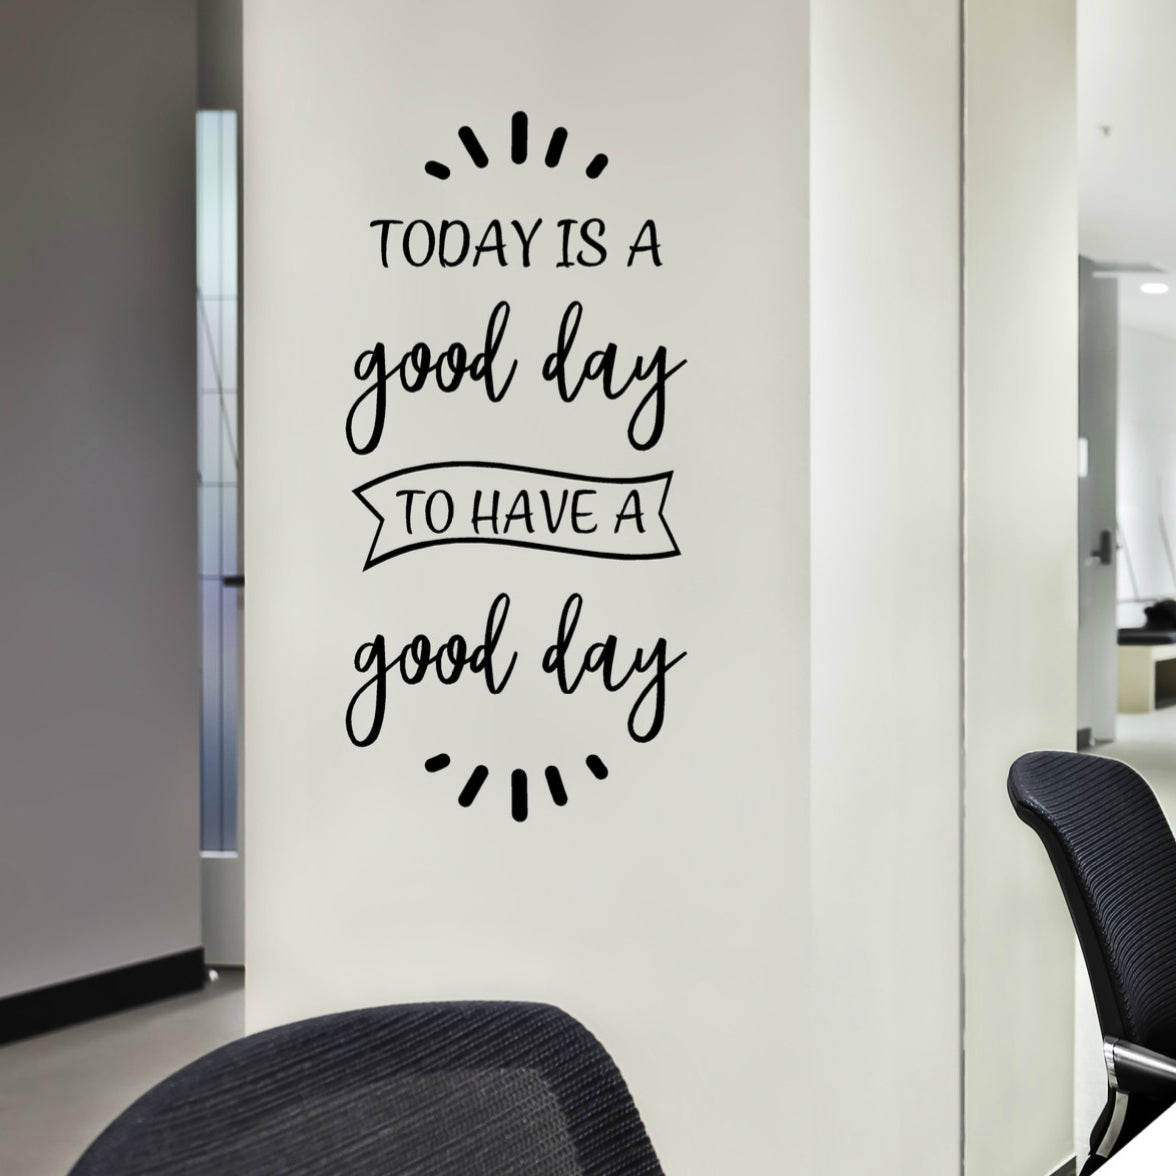 Inspirational Wall Decals